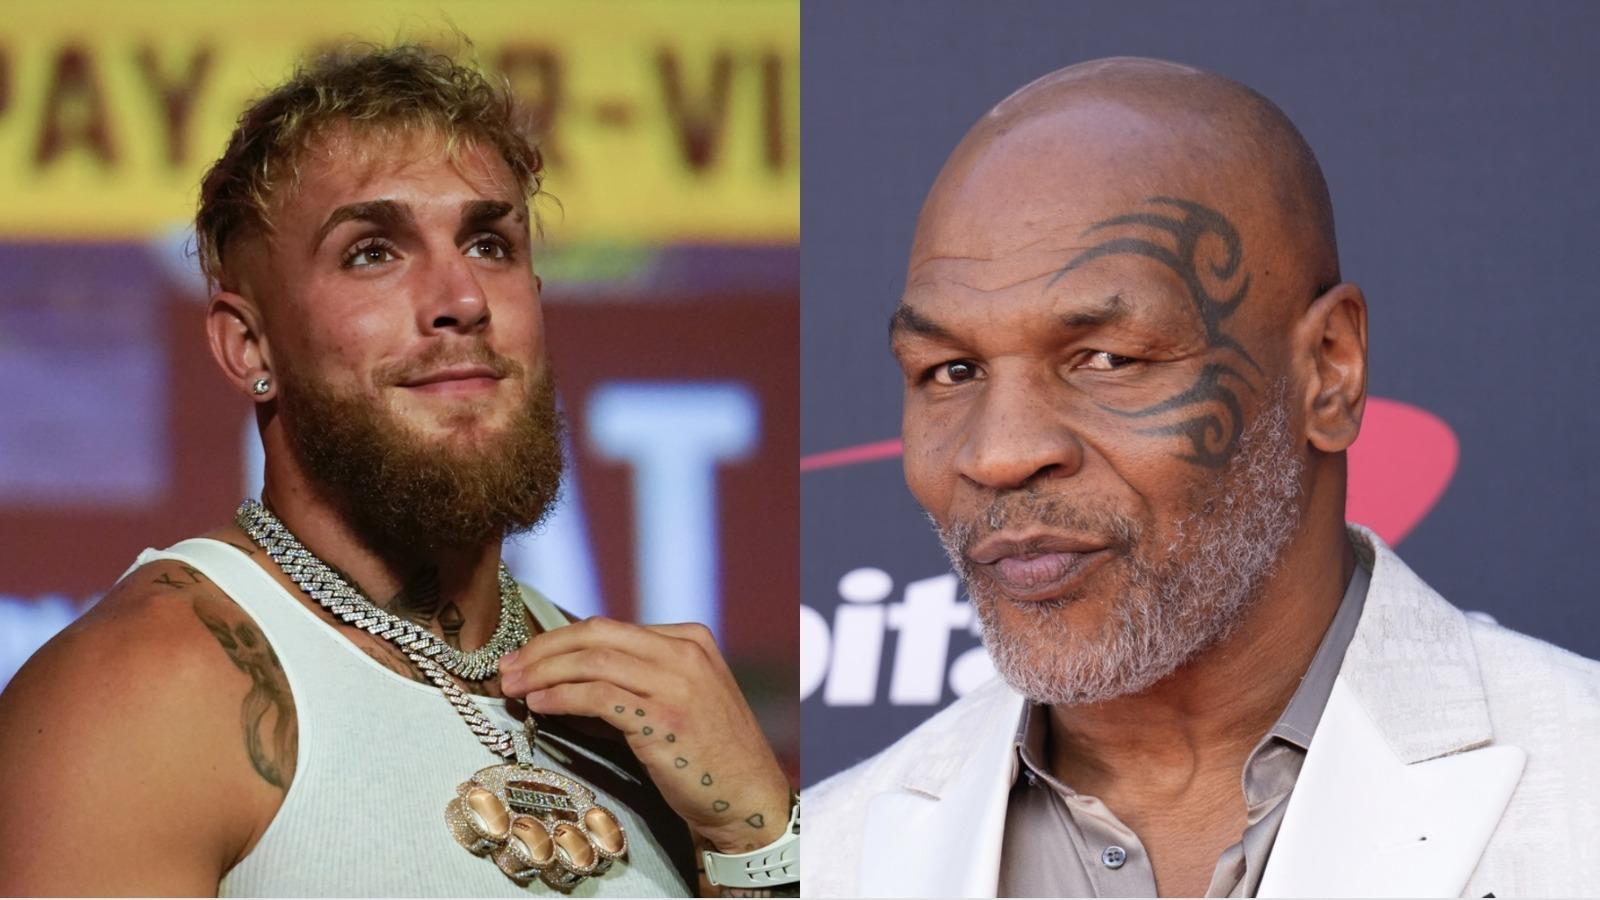 Jake Paul will fight Mike Tyson in a boxing match in July, and fans are offering hilarious predictions ahead of the bout